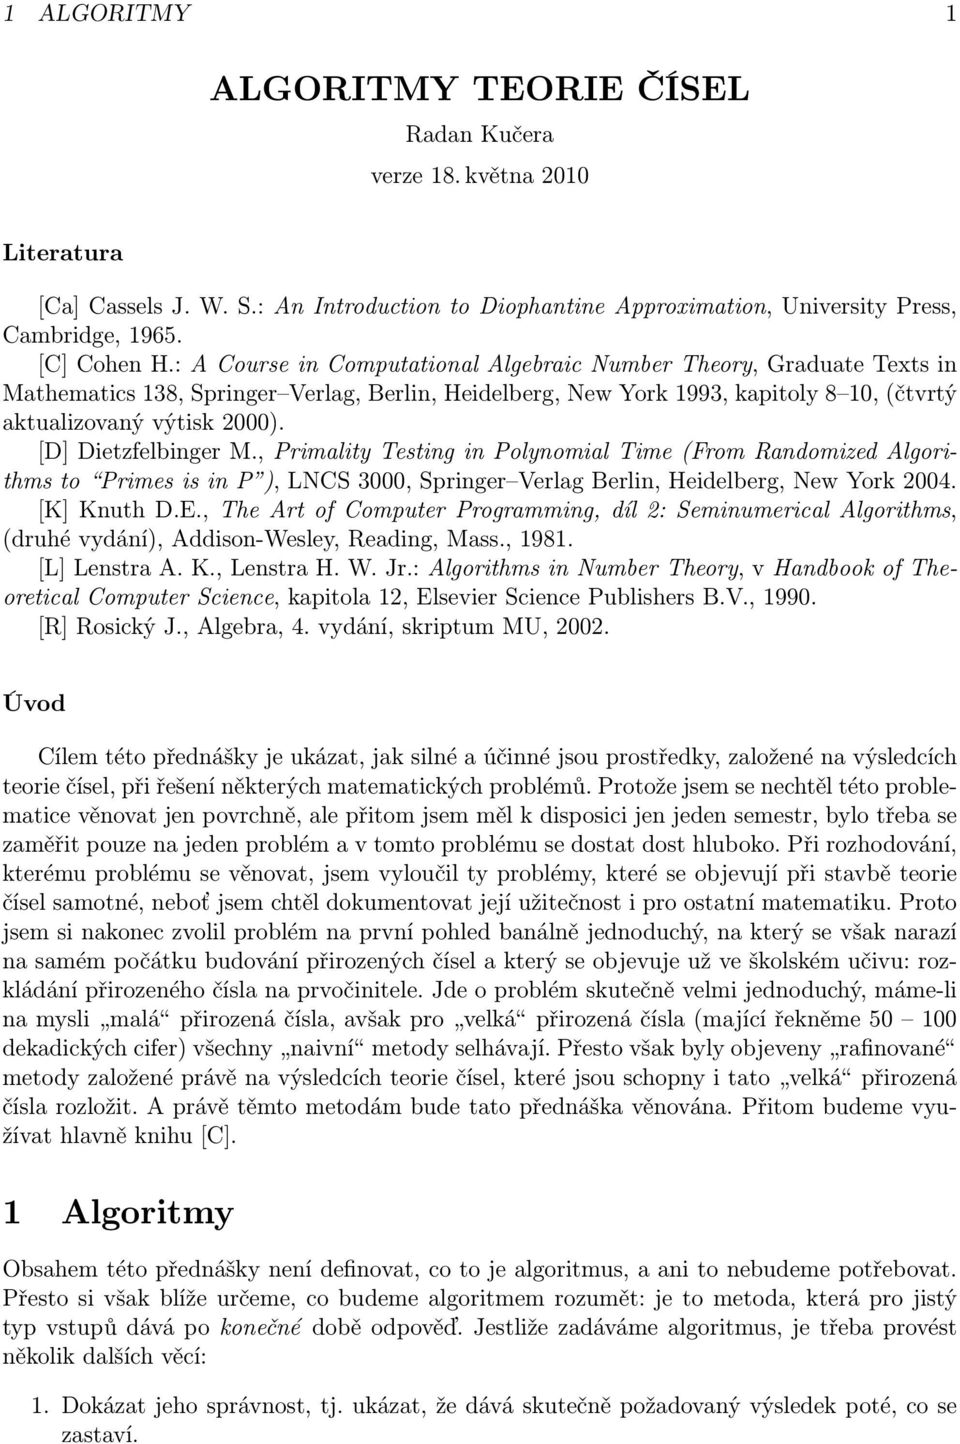 [D] Dietzfelbinger M., Primality Testing in Polynomial Time (From Randomized Algorithms to Primes is in P ), LNCS 3000, Springer Verlag Berlin, Heidelberg, New York 2004. [K] Knuth D.E.